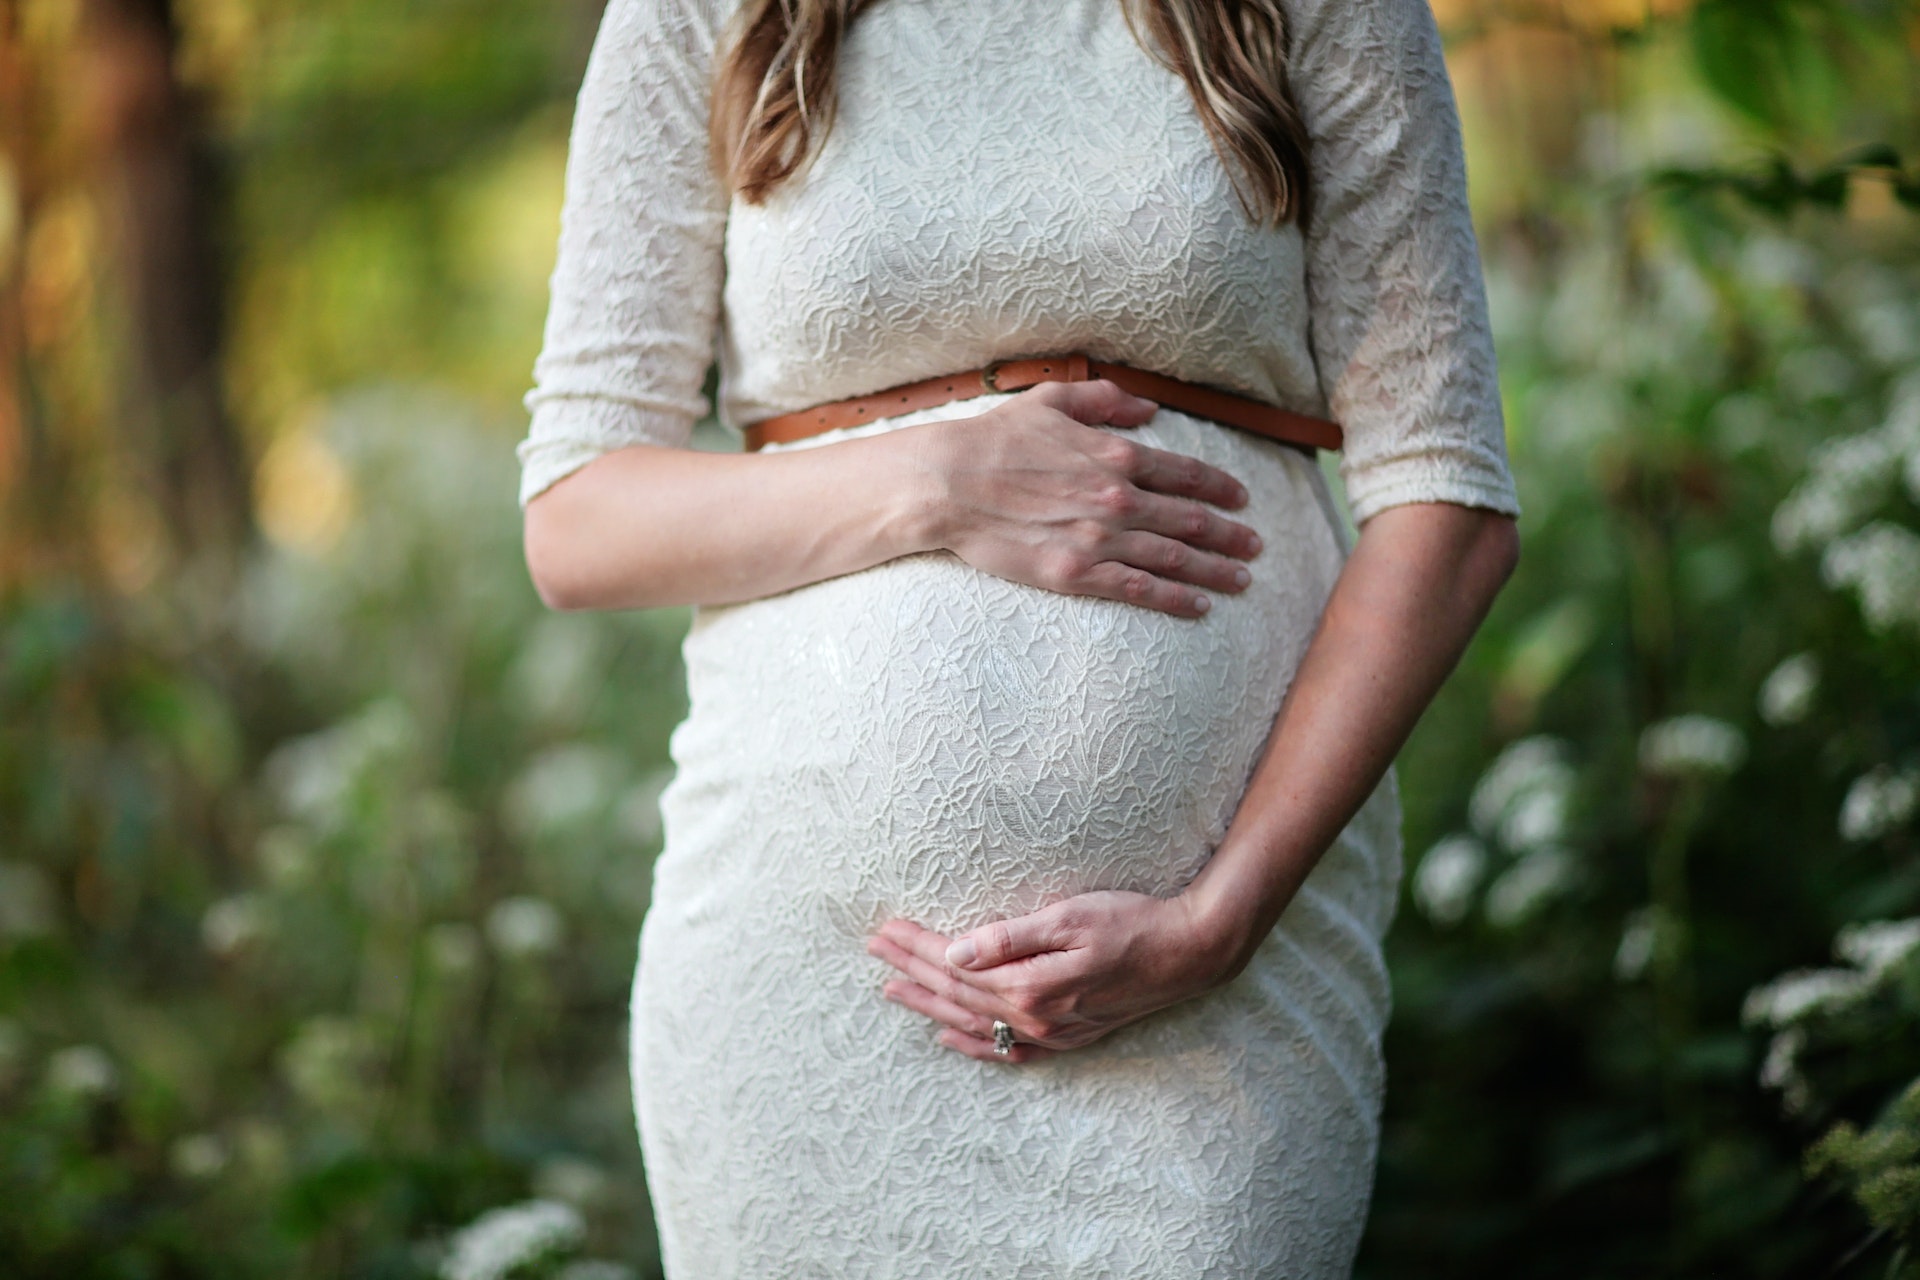 A pregnant woman circling her belly | Source: Pexels